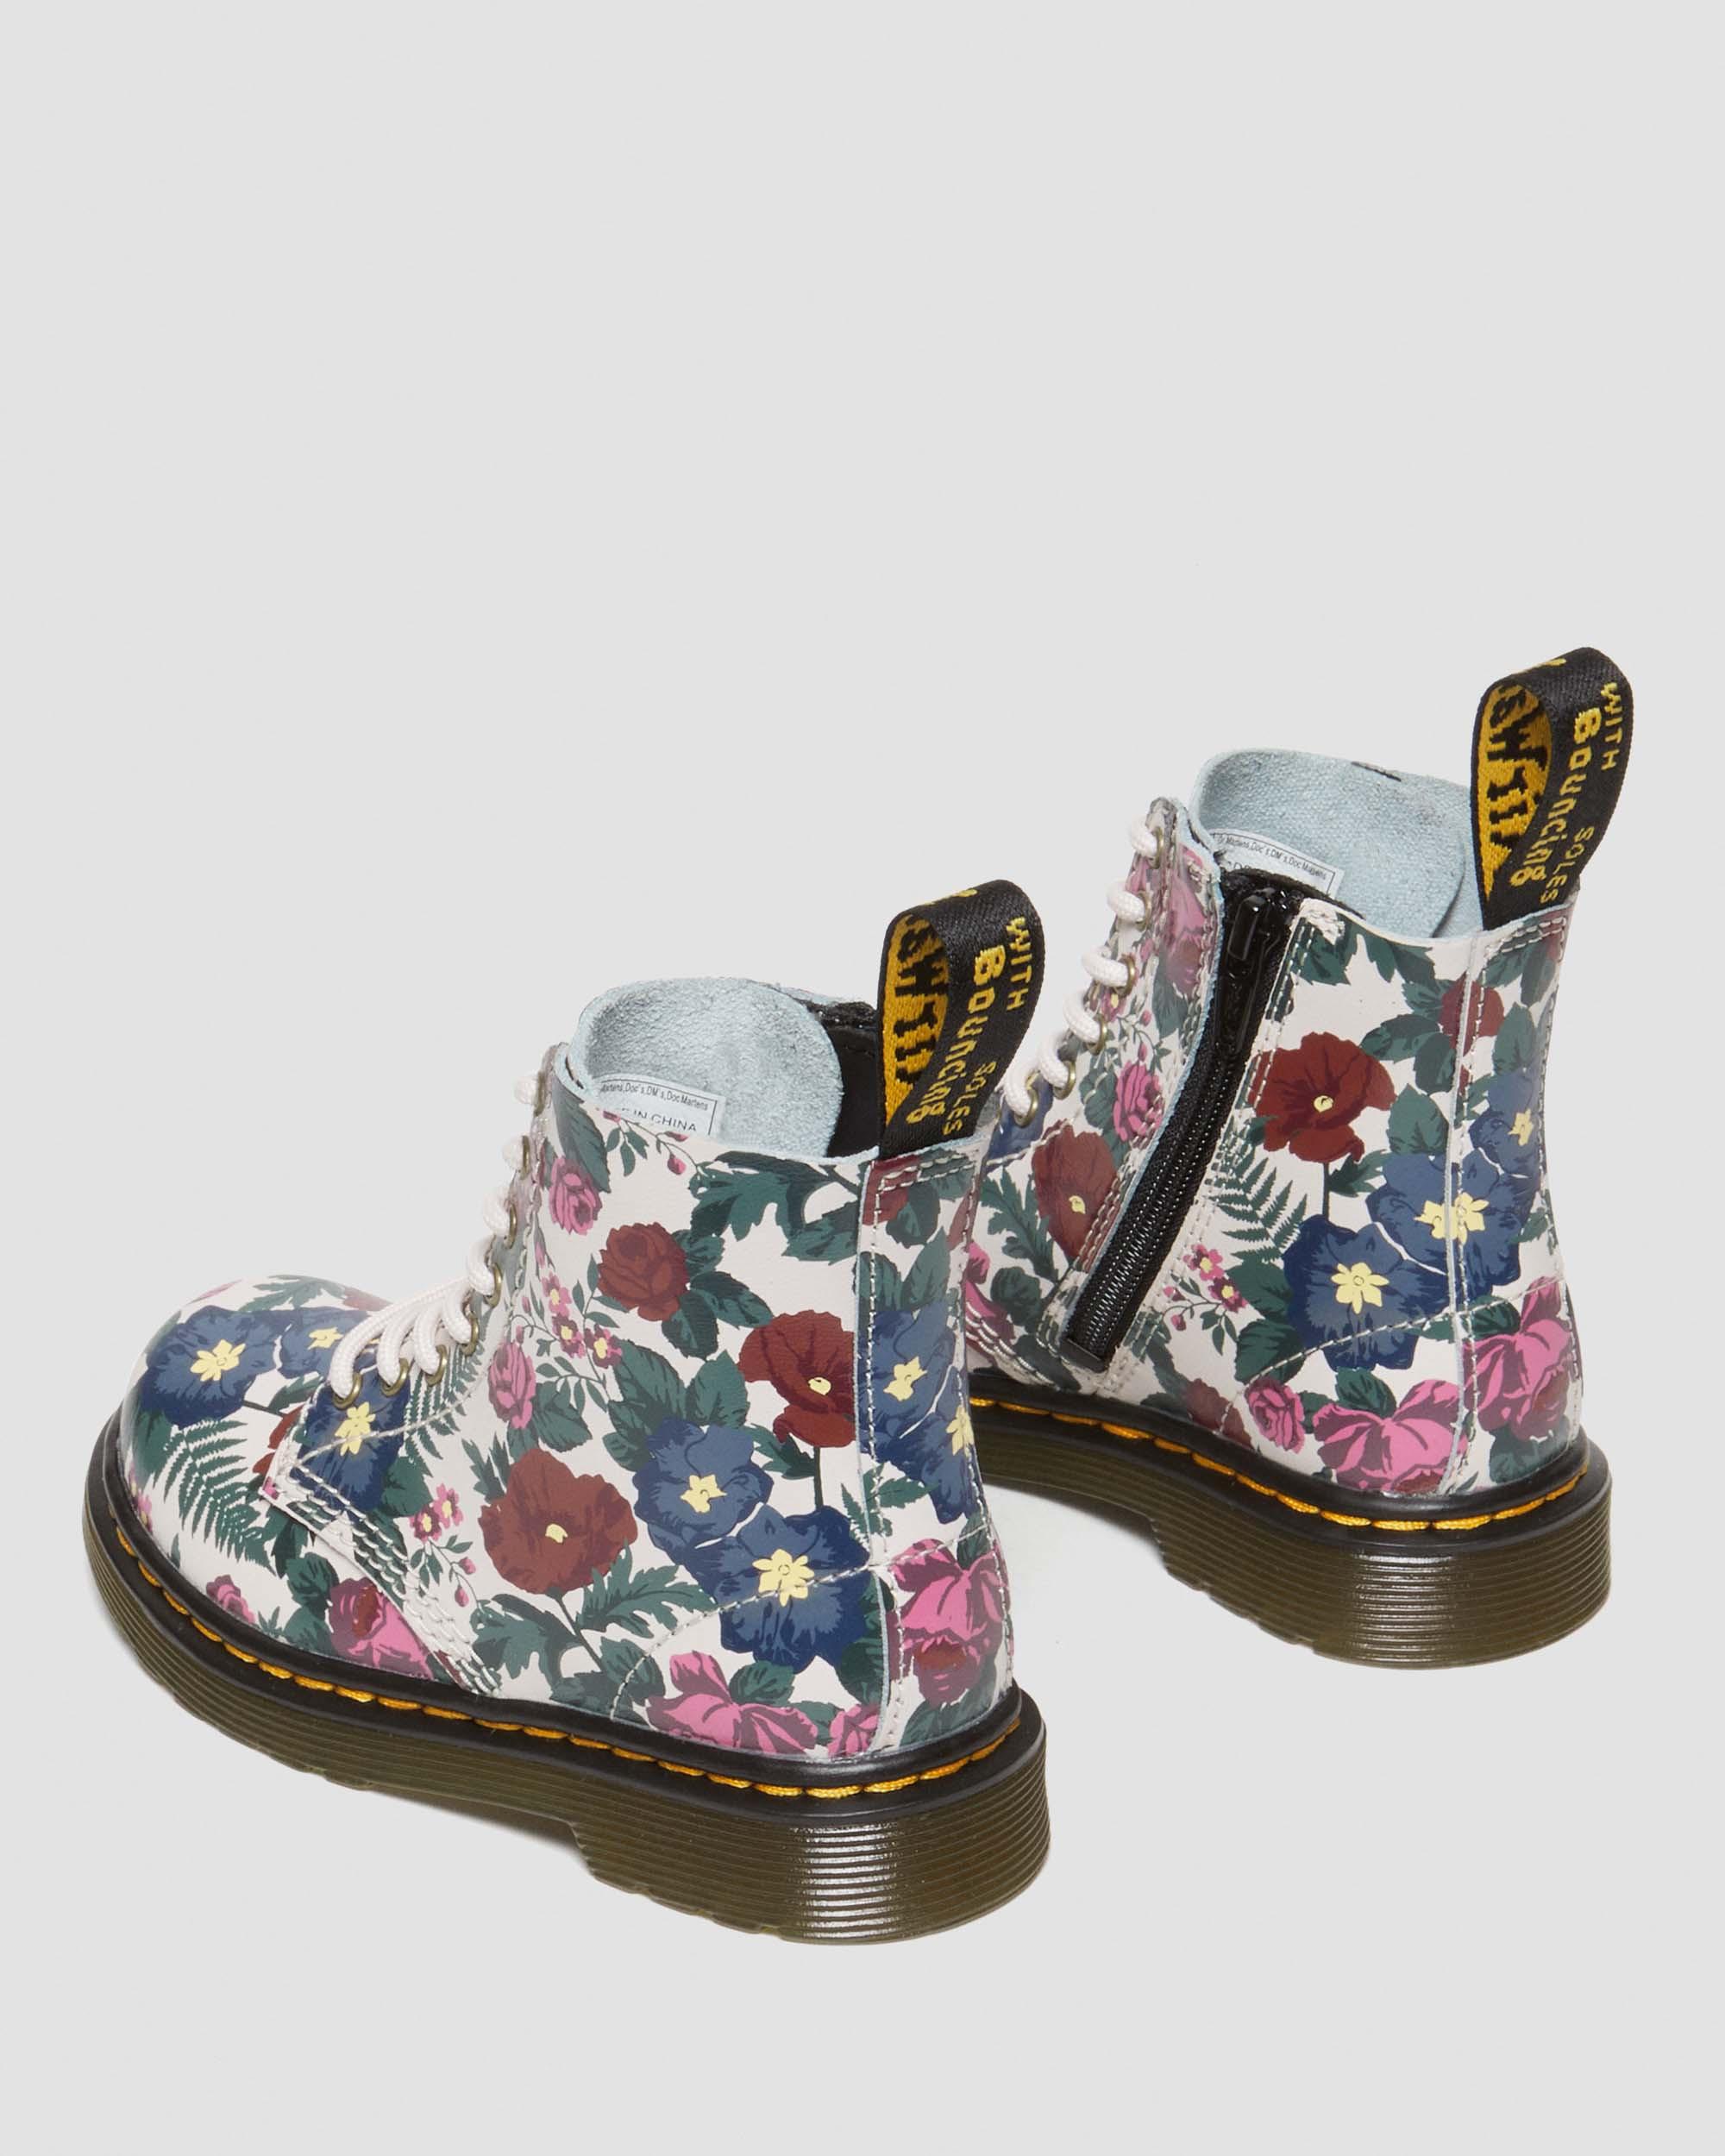 Toddler 1460 English Garden Print Leather Boots in Multi